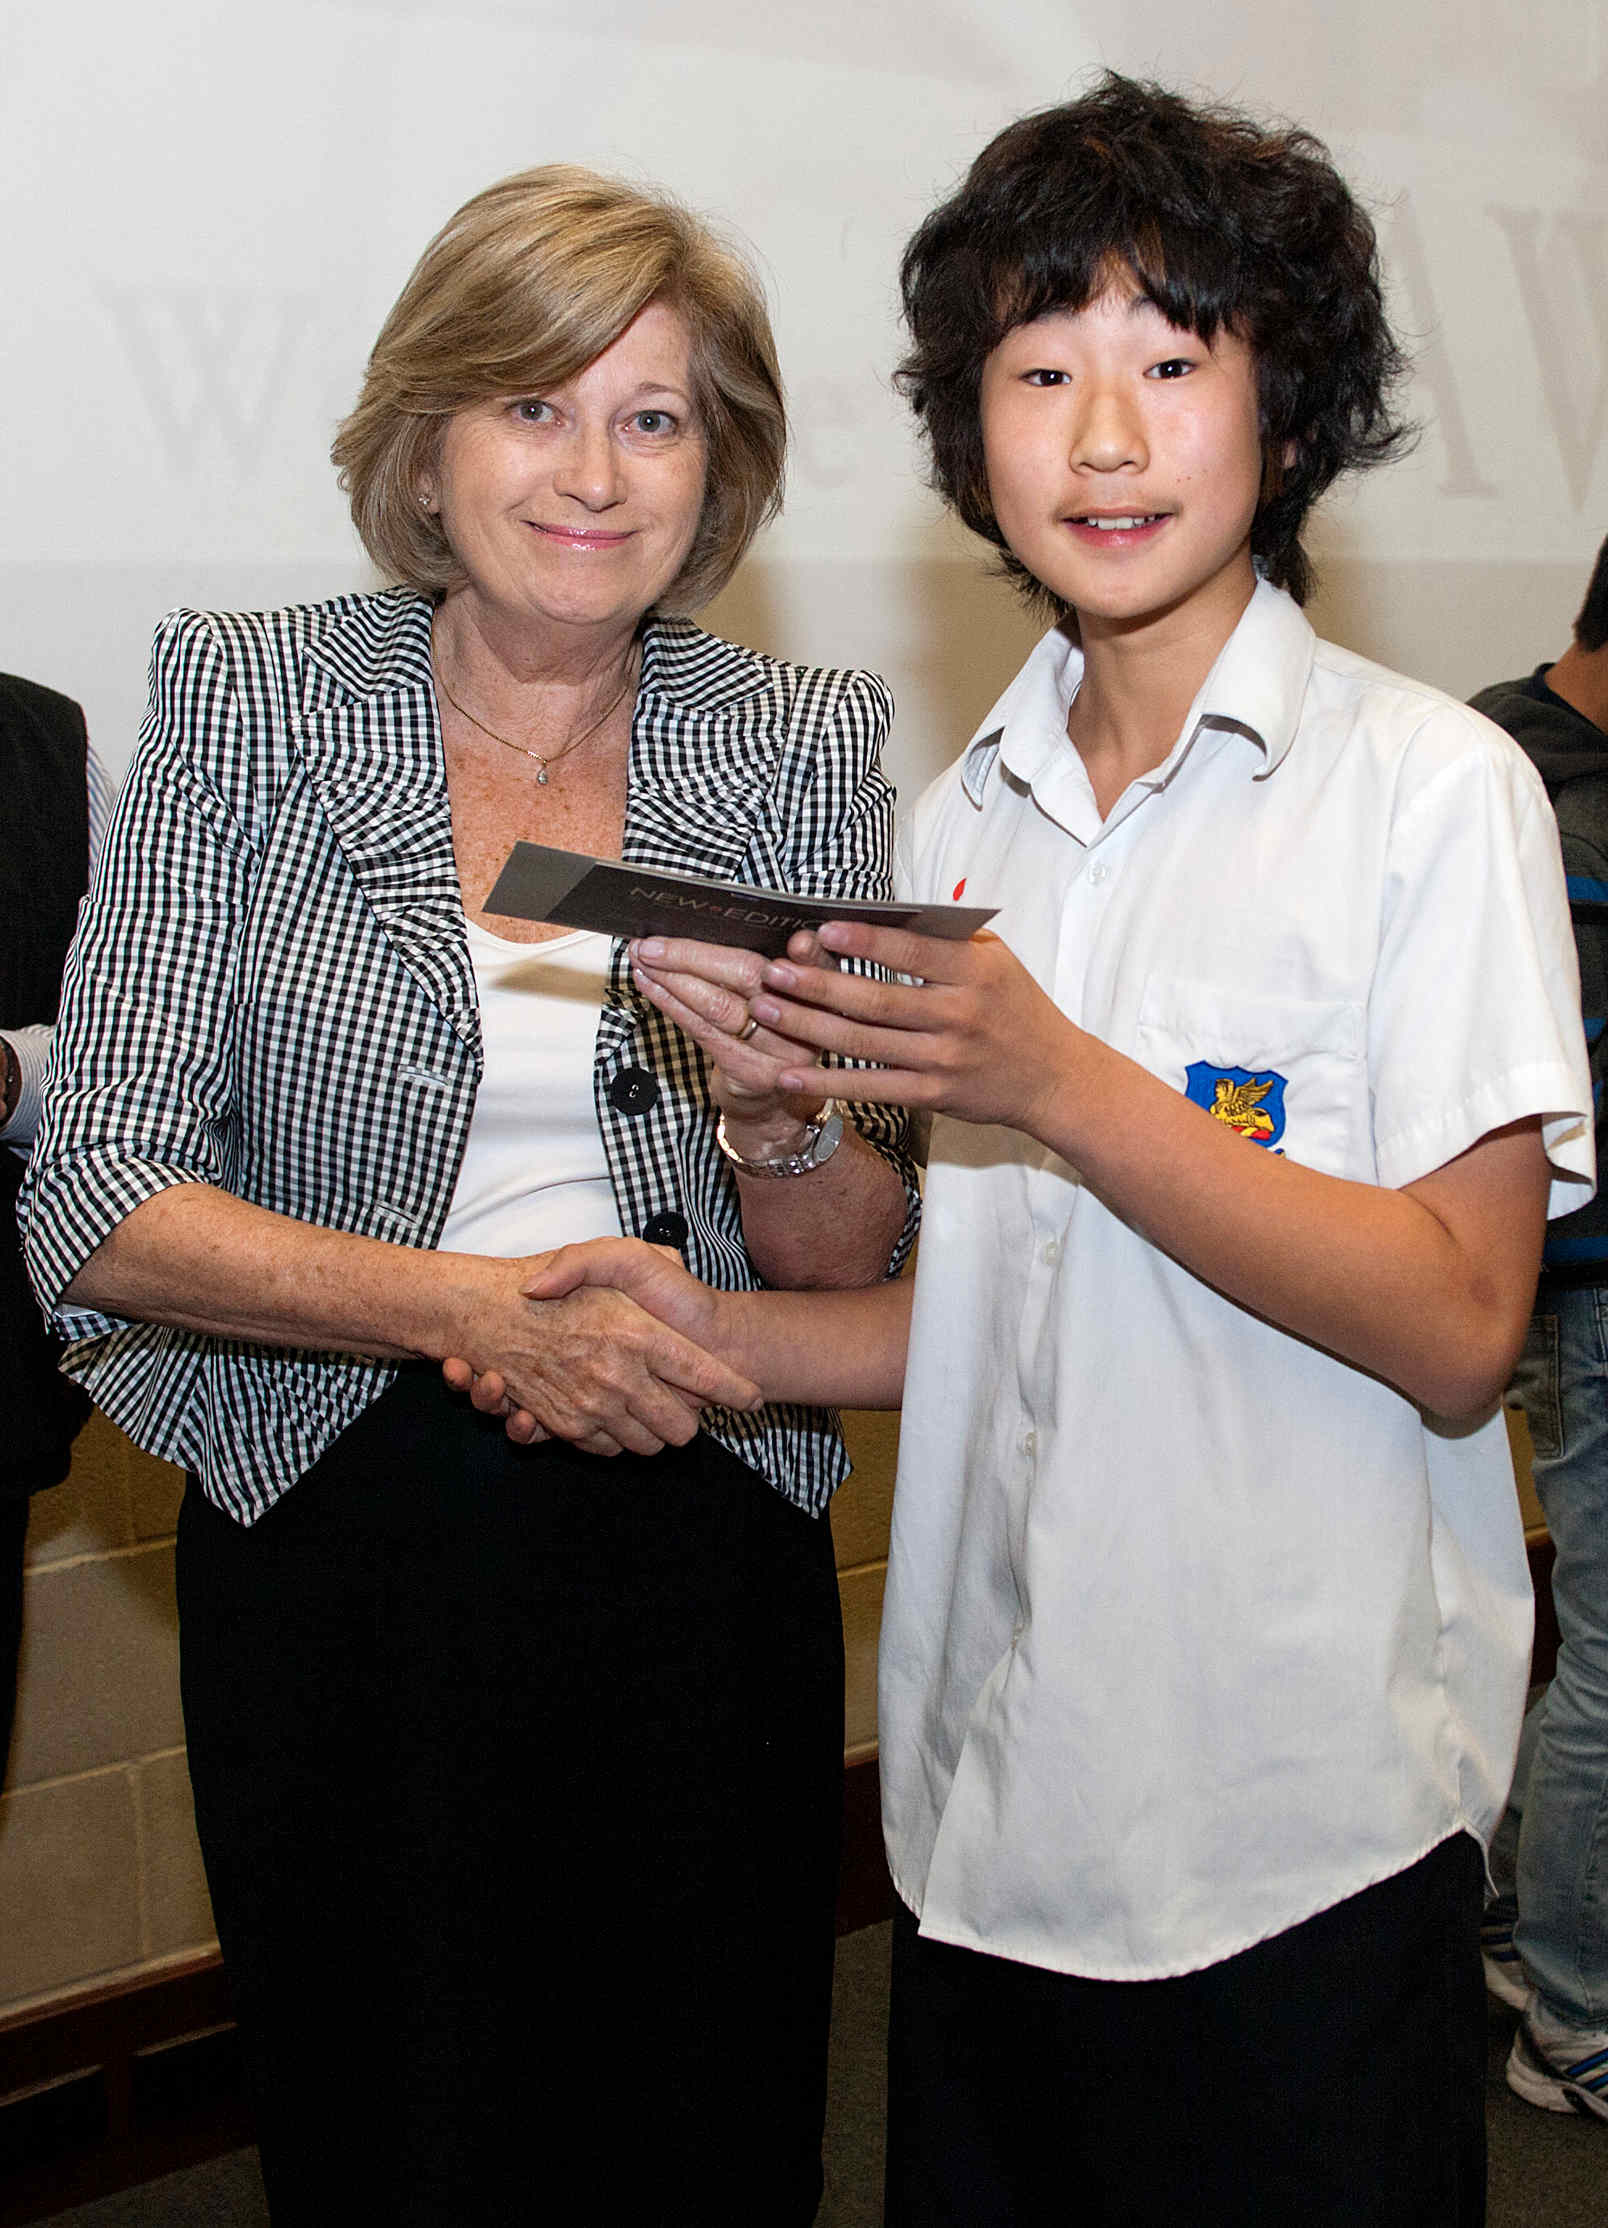 WAJO 2011 Awards: Individual - Year 8 - First (Minister for
Education Award of Excellence)